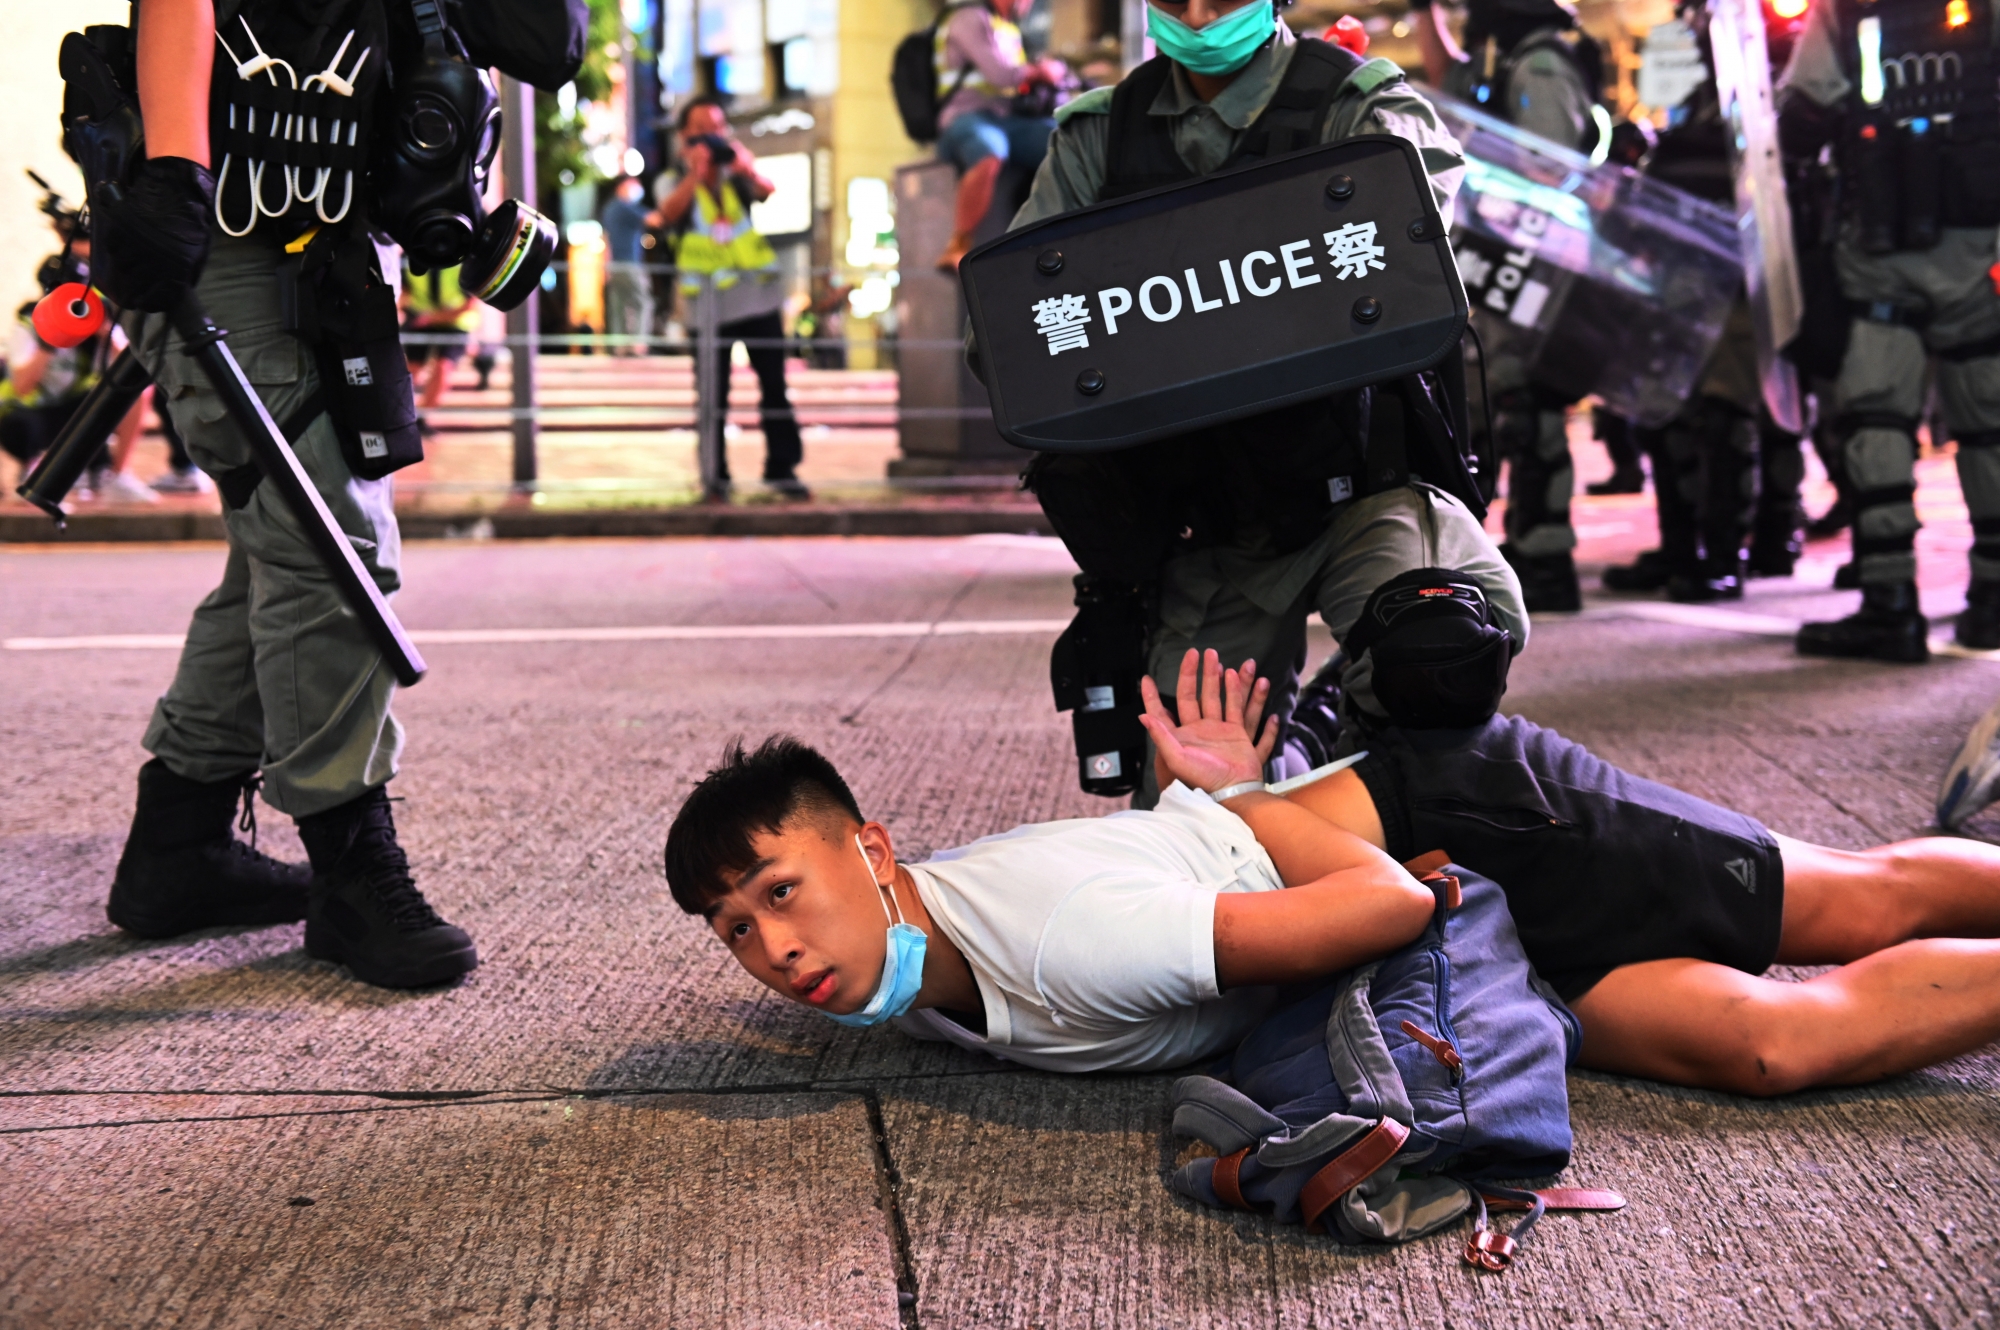 epaselect epa08520539 Police officers detain protesters during a rally against a new national security law on the 23rd anniversary of the establishment of the Hong Kong Special Administrative Region in Hong Kong, China, 01 July 2020. The new national security law, that Beijing has tailor-made for Hong Kong, prohibits acts of secession, subversion, terrorism and collusion with foreign forces to endanger national security.  EPA/MIGUEL CANDELA
ArcInfo